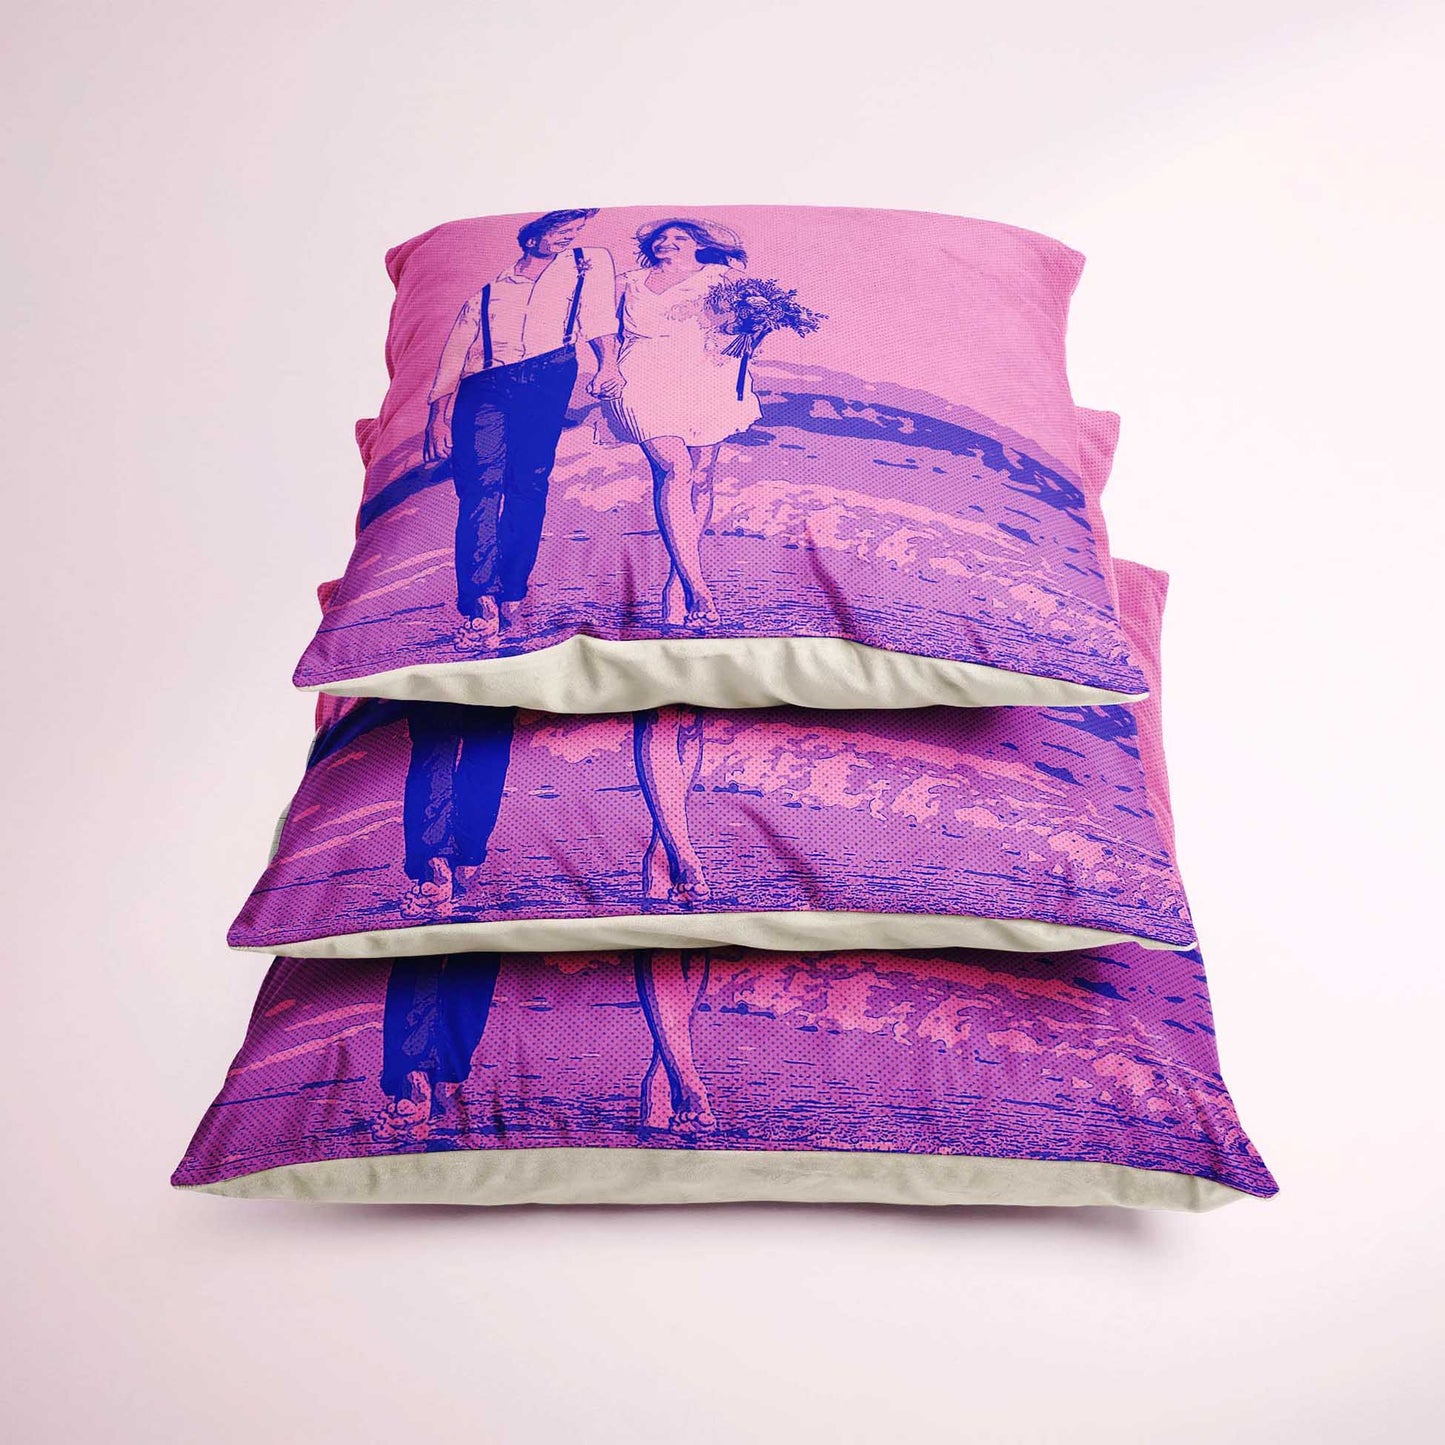 Embrace the charm of old-school cartoons with our Personalised Purple and Pink Comics Cushion. Turn your photo into a personalized comic artwork, showcasing vibrant and fresh colors. Handmade with soft velvet